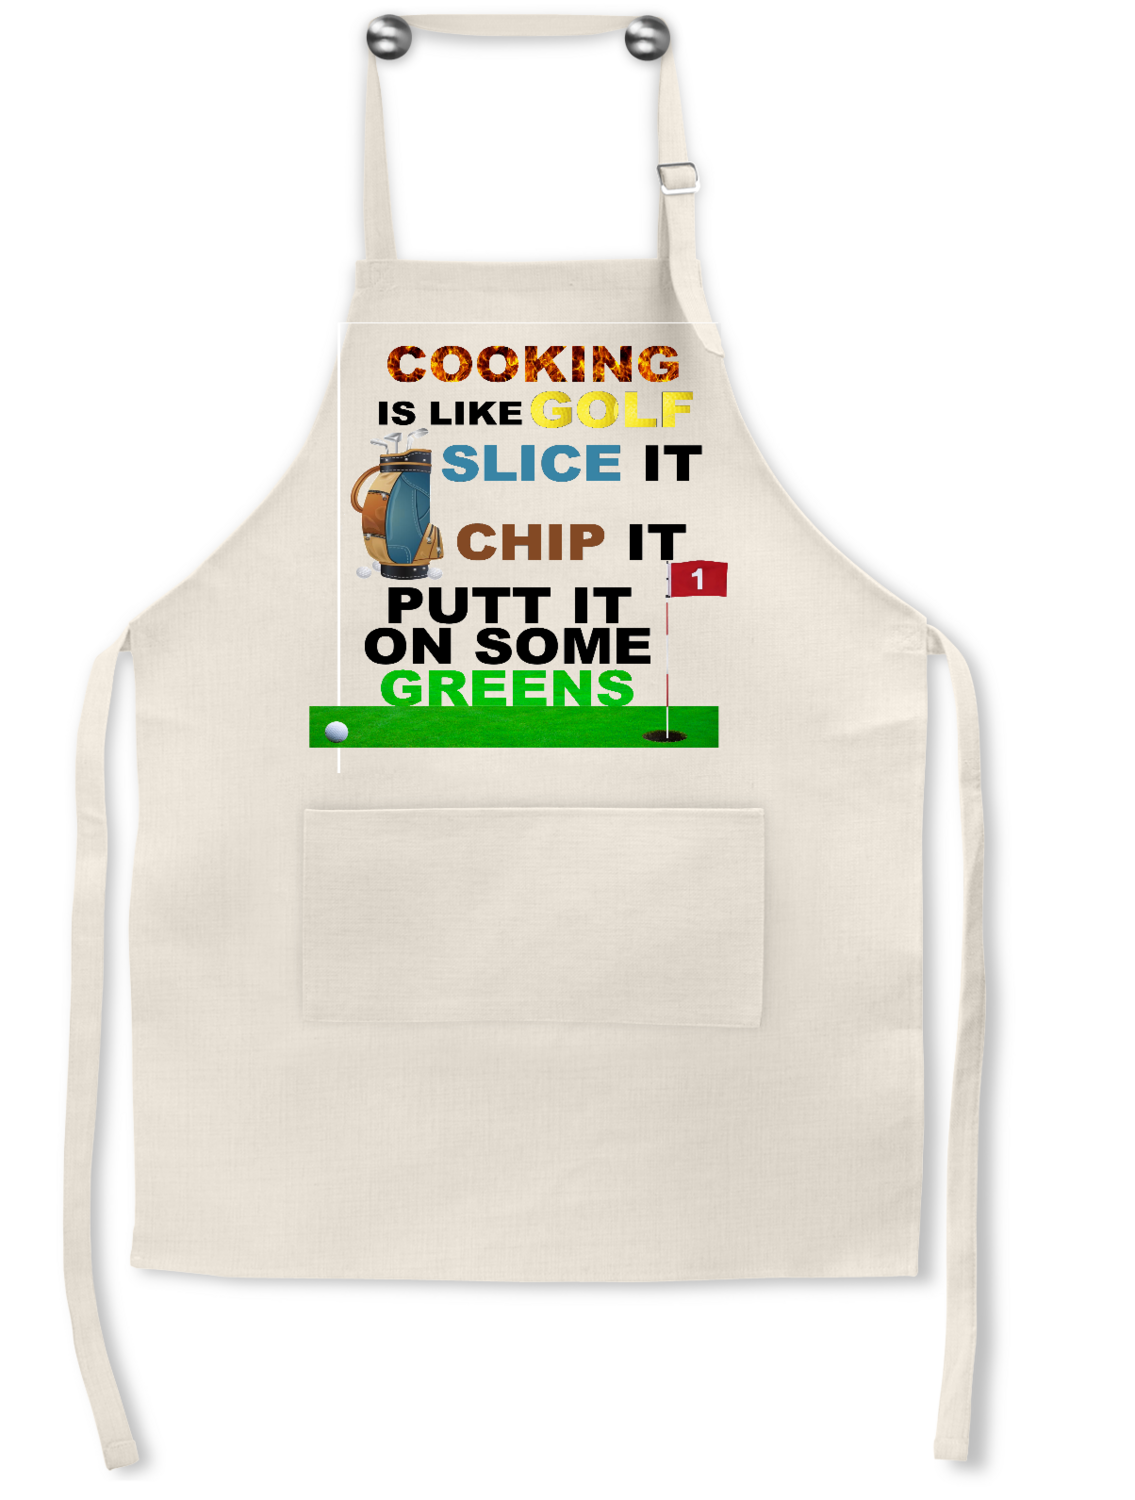 Apron: COOKING IS LIKE GOLF SLICE IT, CHIP IT PUTT IT ON SOME GREENS